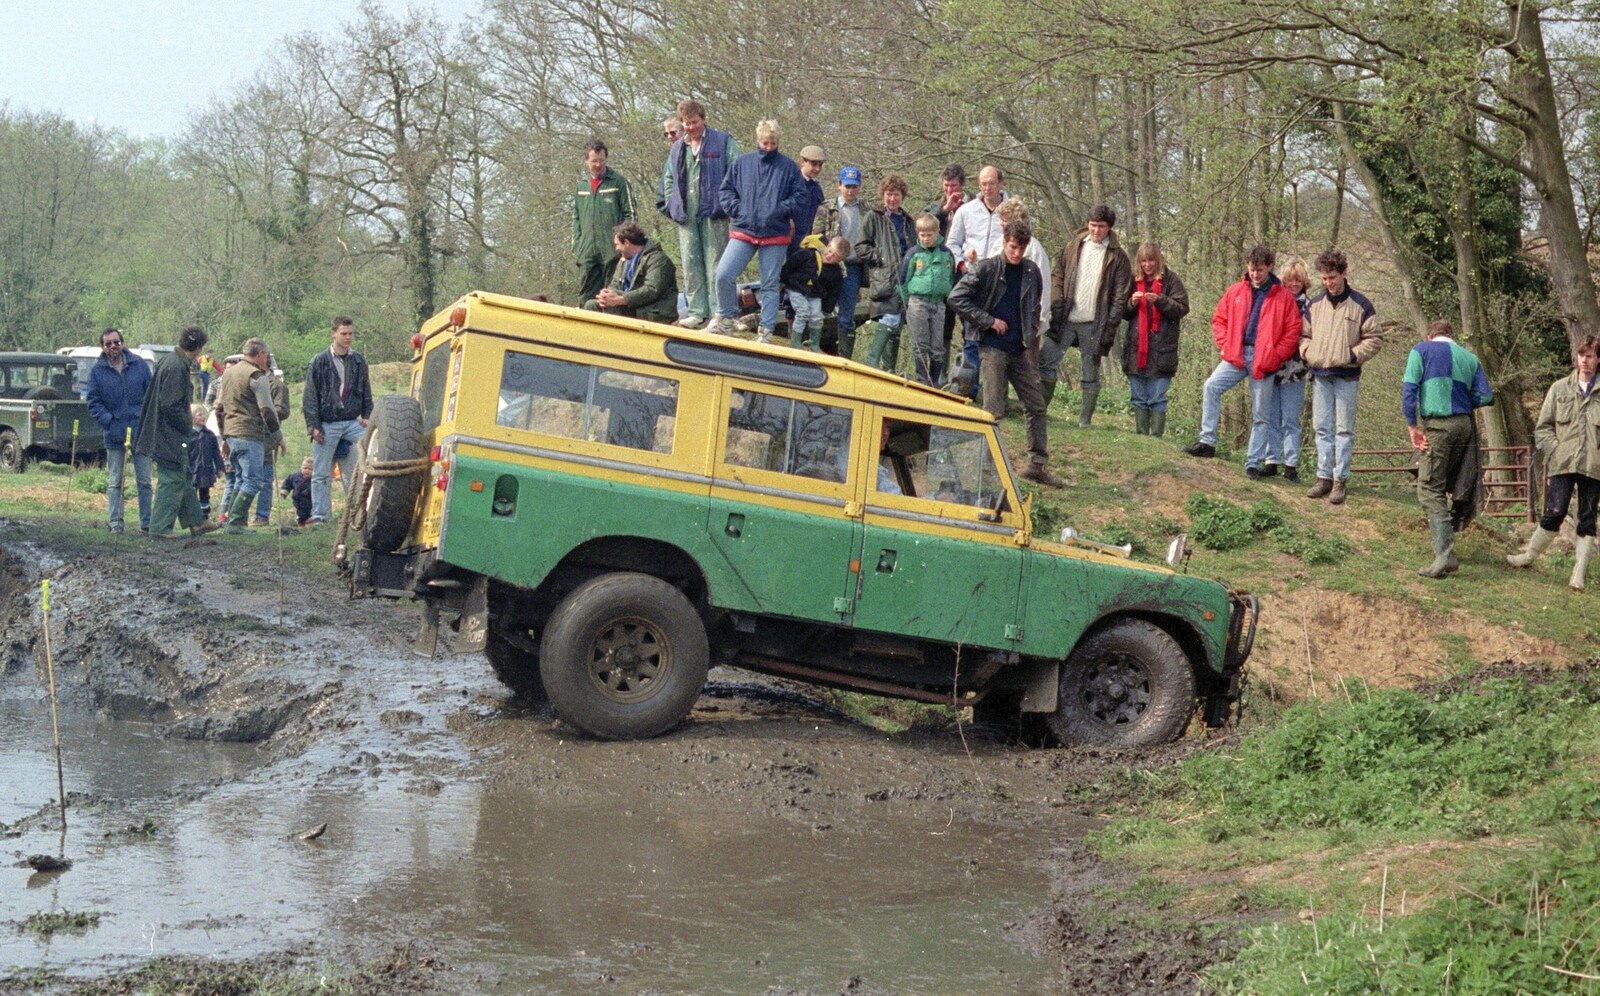 Crowds watch a Land Rover from The Newmarket Dog Show and Dobermans on the Ling, Newmarket and Wortham, Suffolk - 3rd April 1991